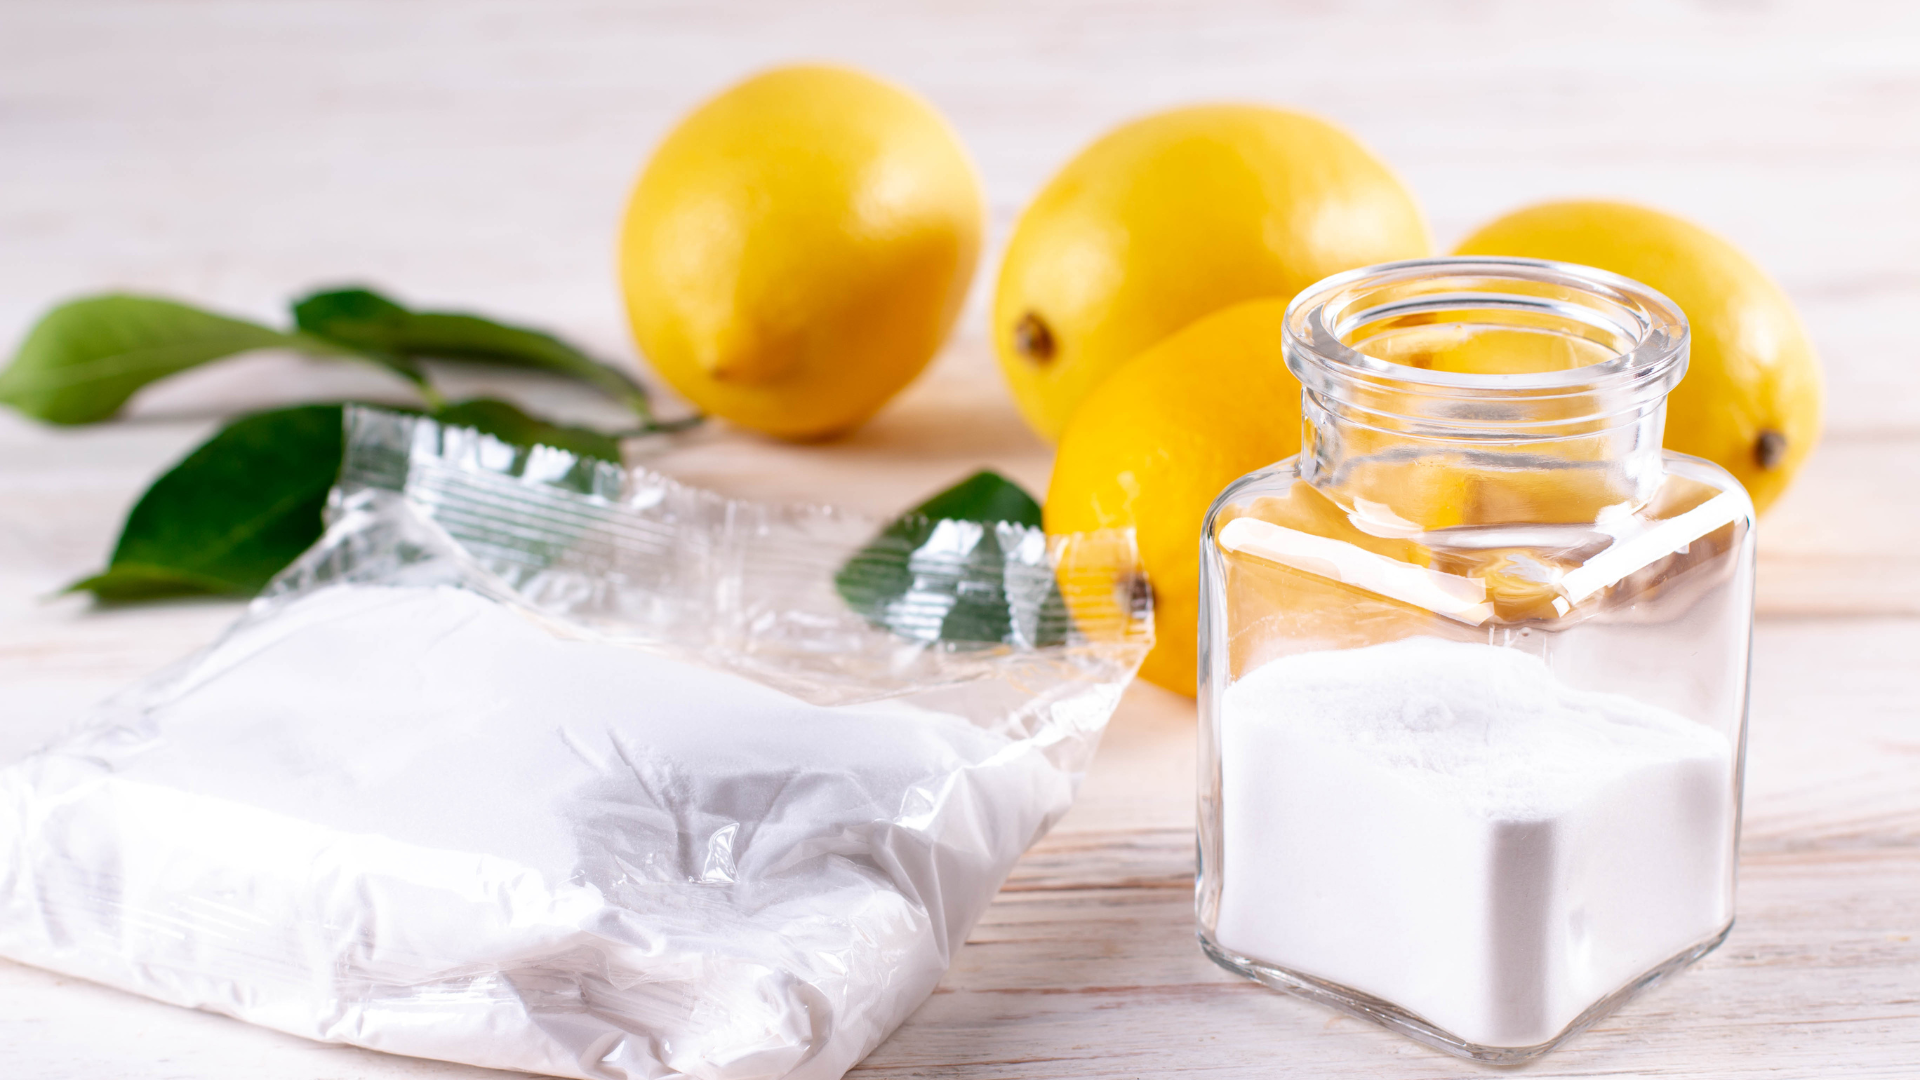 Lemons and at home products used to remove gasoline smell